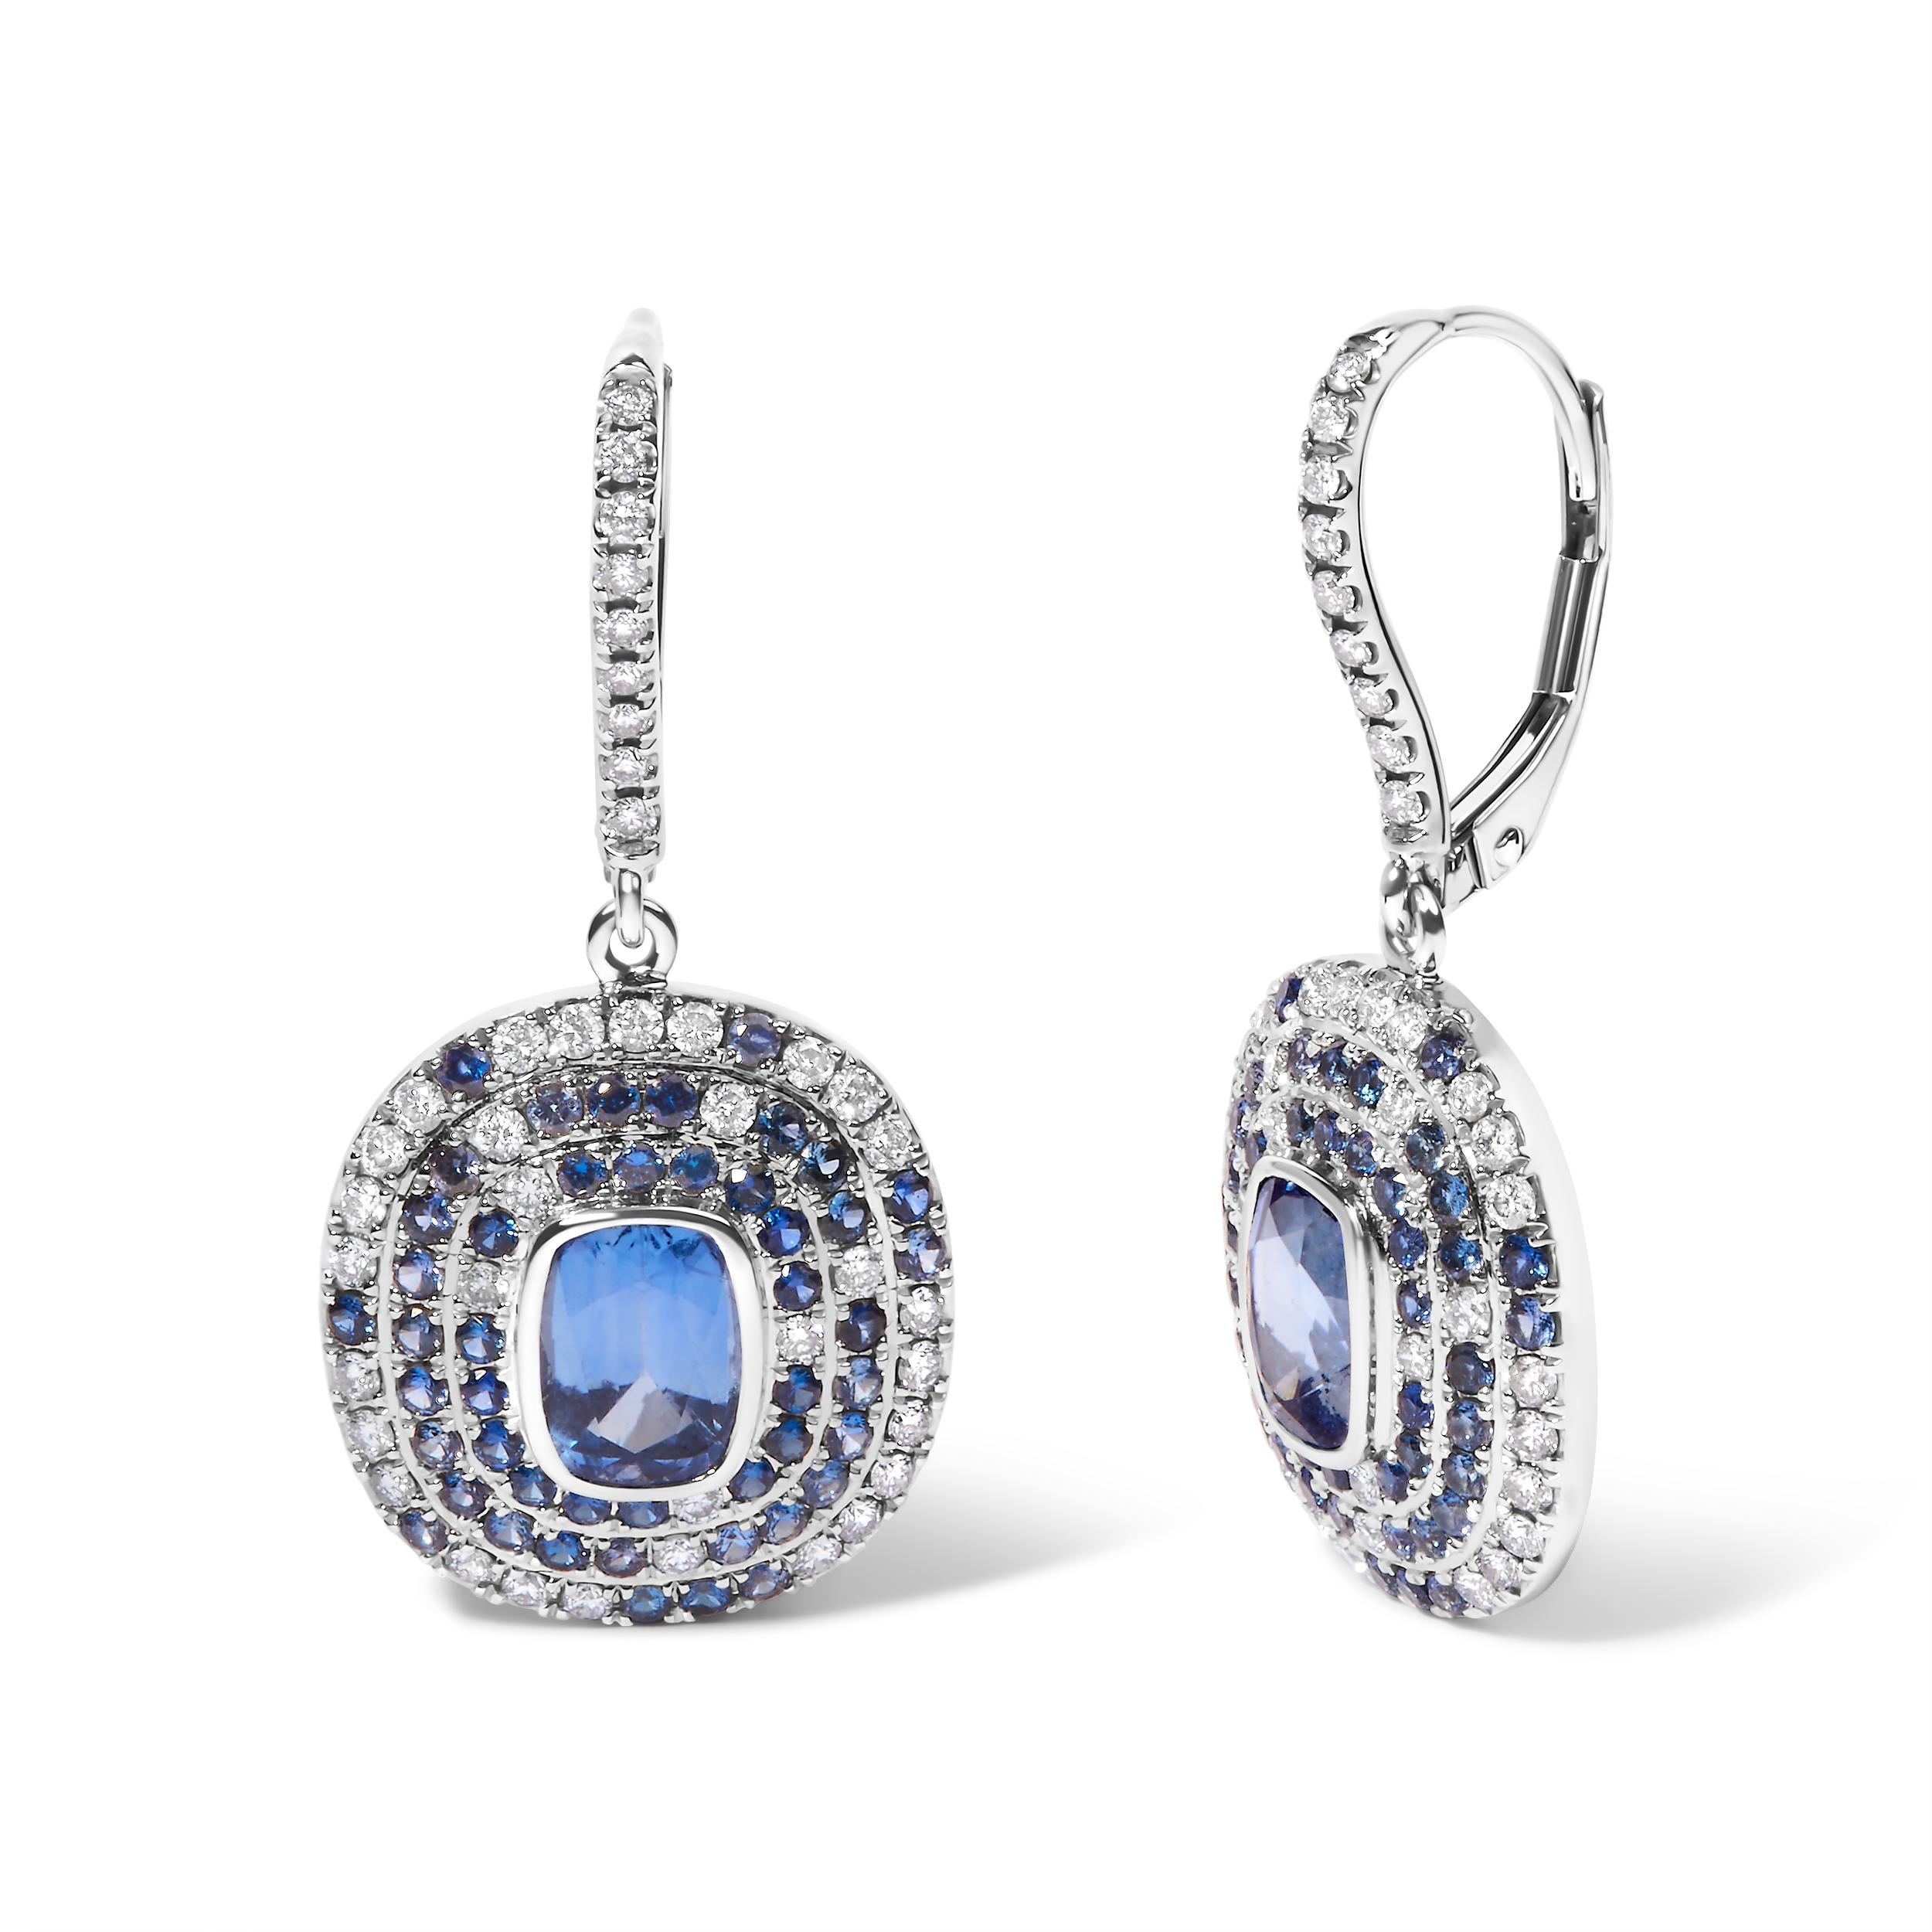 Step into a realm of timeless elegance with our 18K White Gold Natural Blue Sapphire and Diamond Scattered Halo Drop and Dangle Lever back Earrings. Adorned with 96 exquisite sapphires in cushion shape and 80 round diamonds totaling 3/8 cttw, these